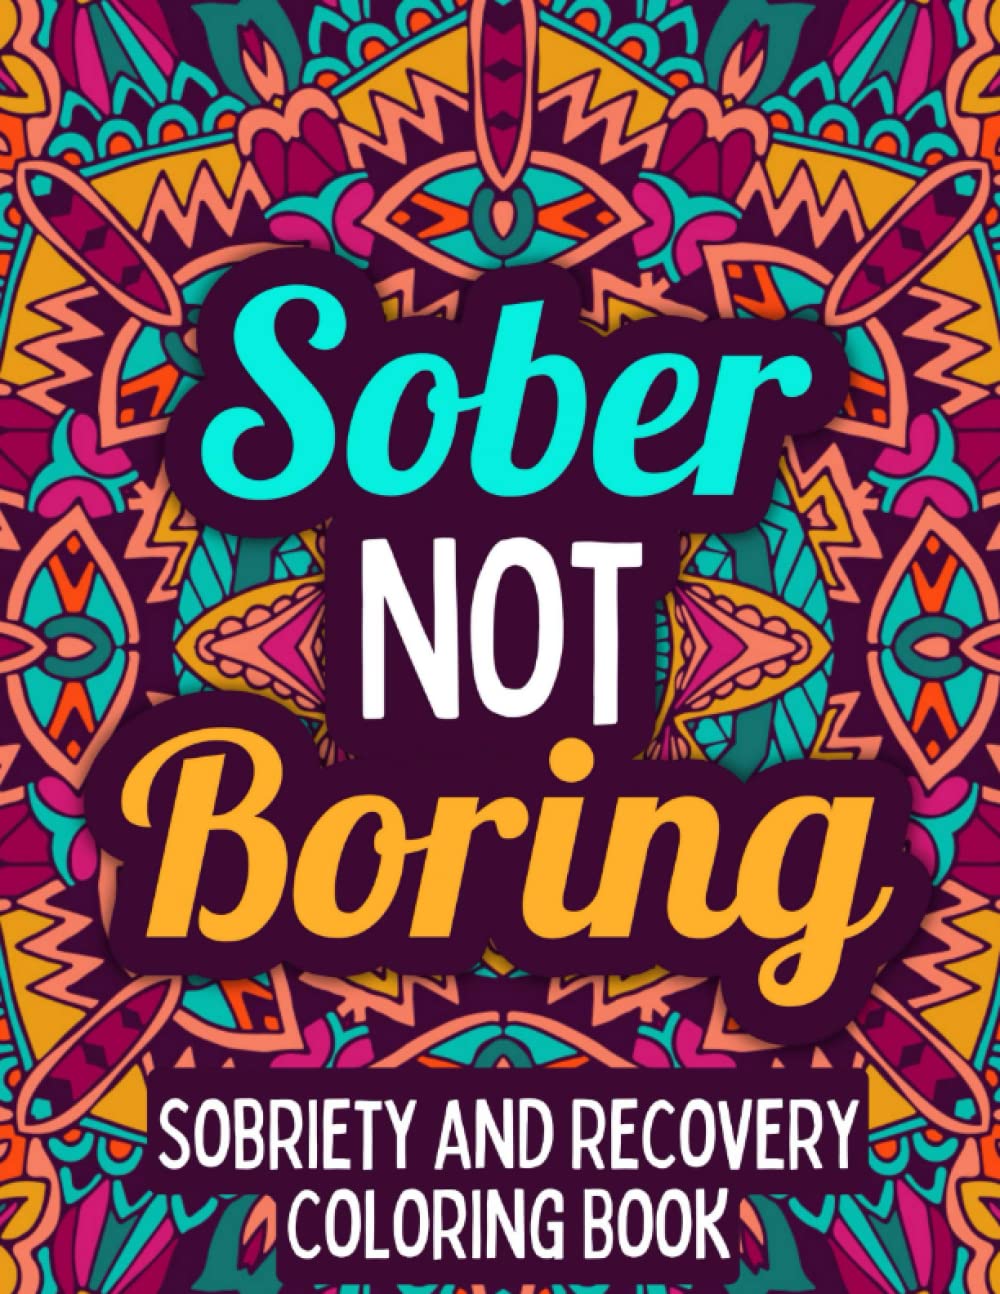 Sober Not Boring: Sobriety & Recovery Coloring Book